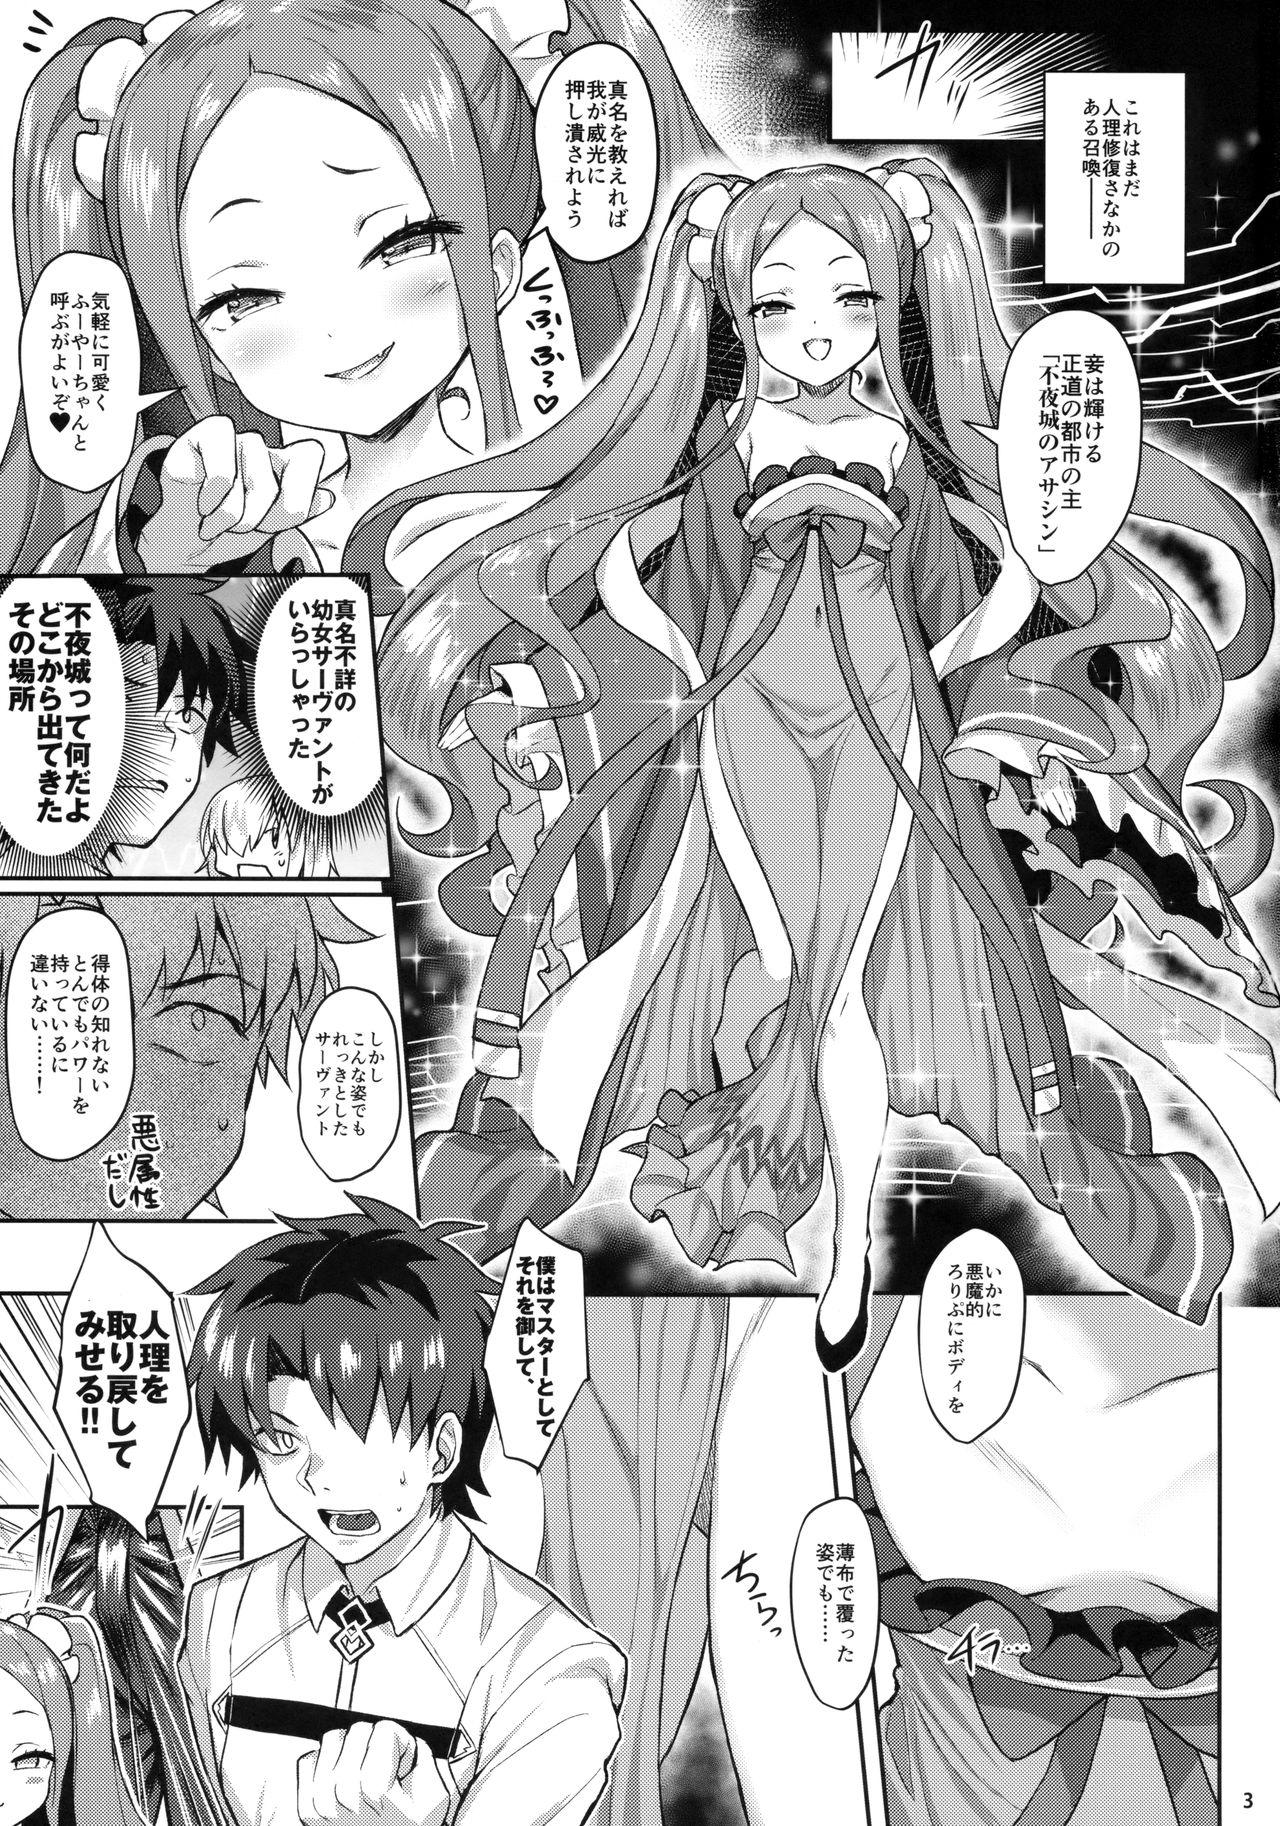 Jacking Fuya Syndrome - Sleepless Syndrome - Fate grand order Spy Camera - Page 2